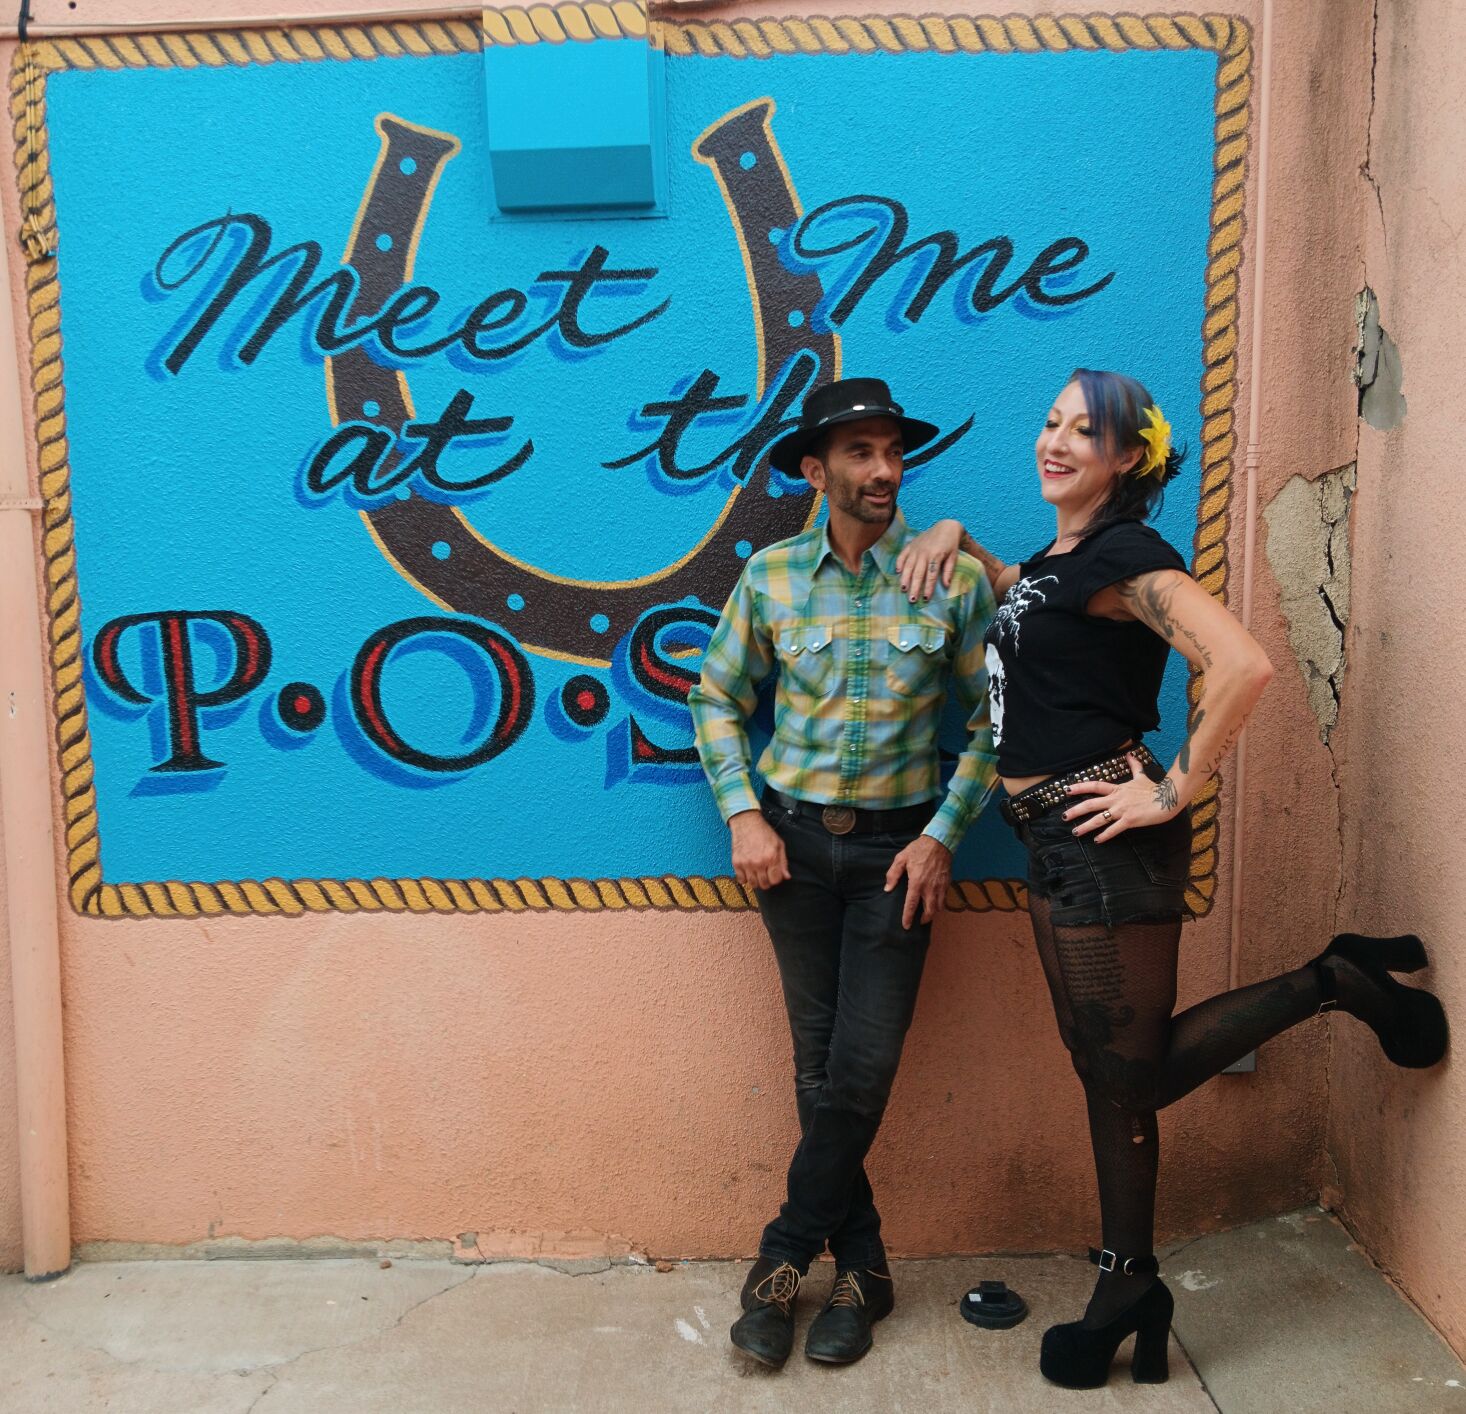 The Hitching Post—A community center that serves alcohol Bisbee myheraldreview picture pic